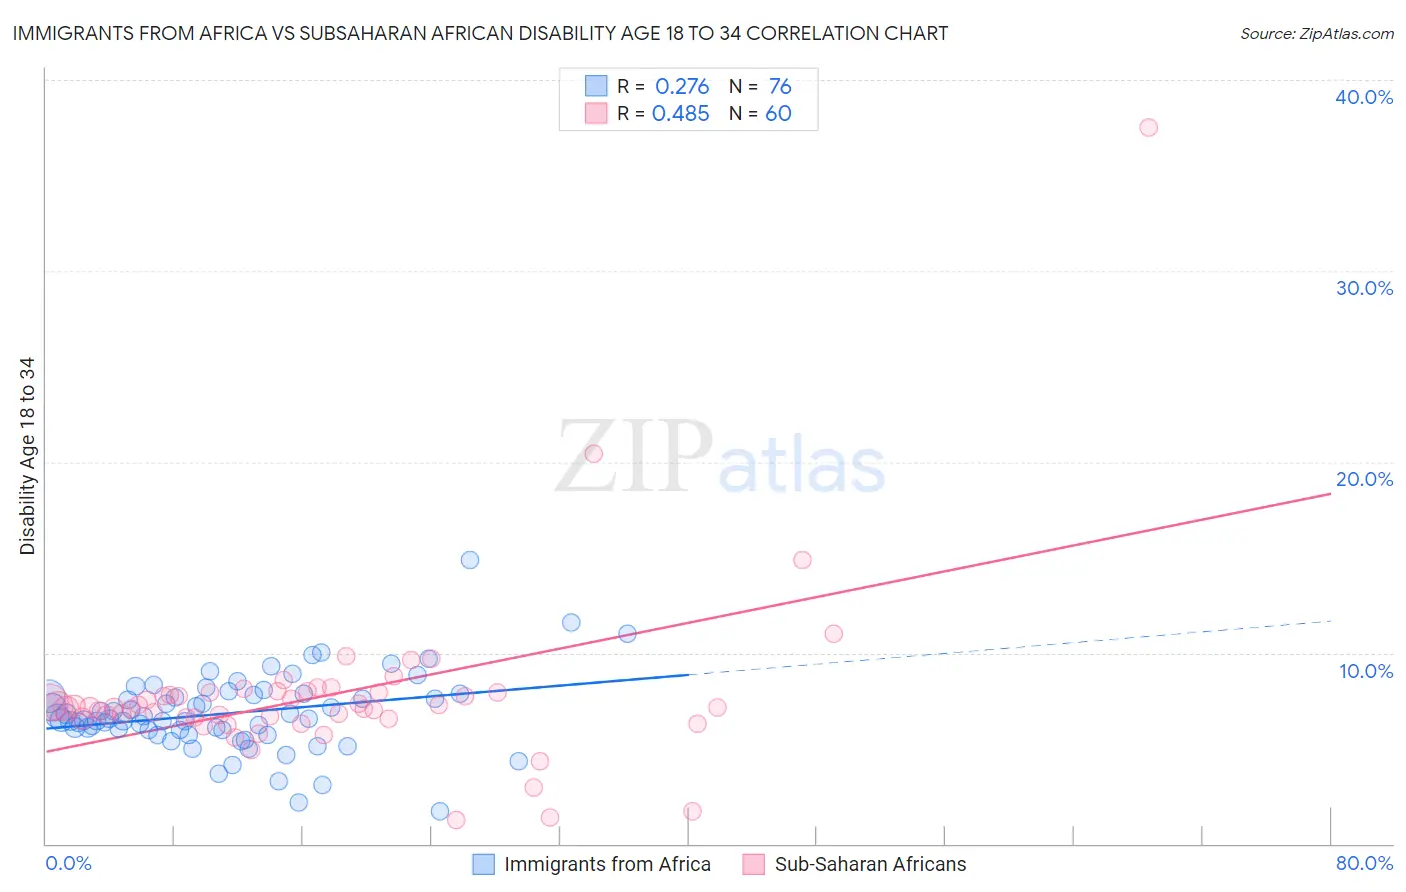 Immigrants from Africa vs Subsaharan African Disability Age 18 to 34